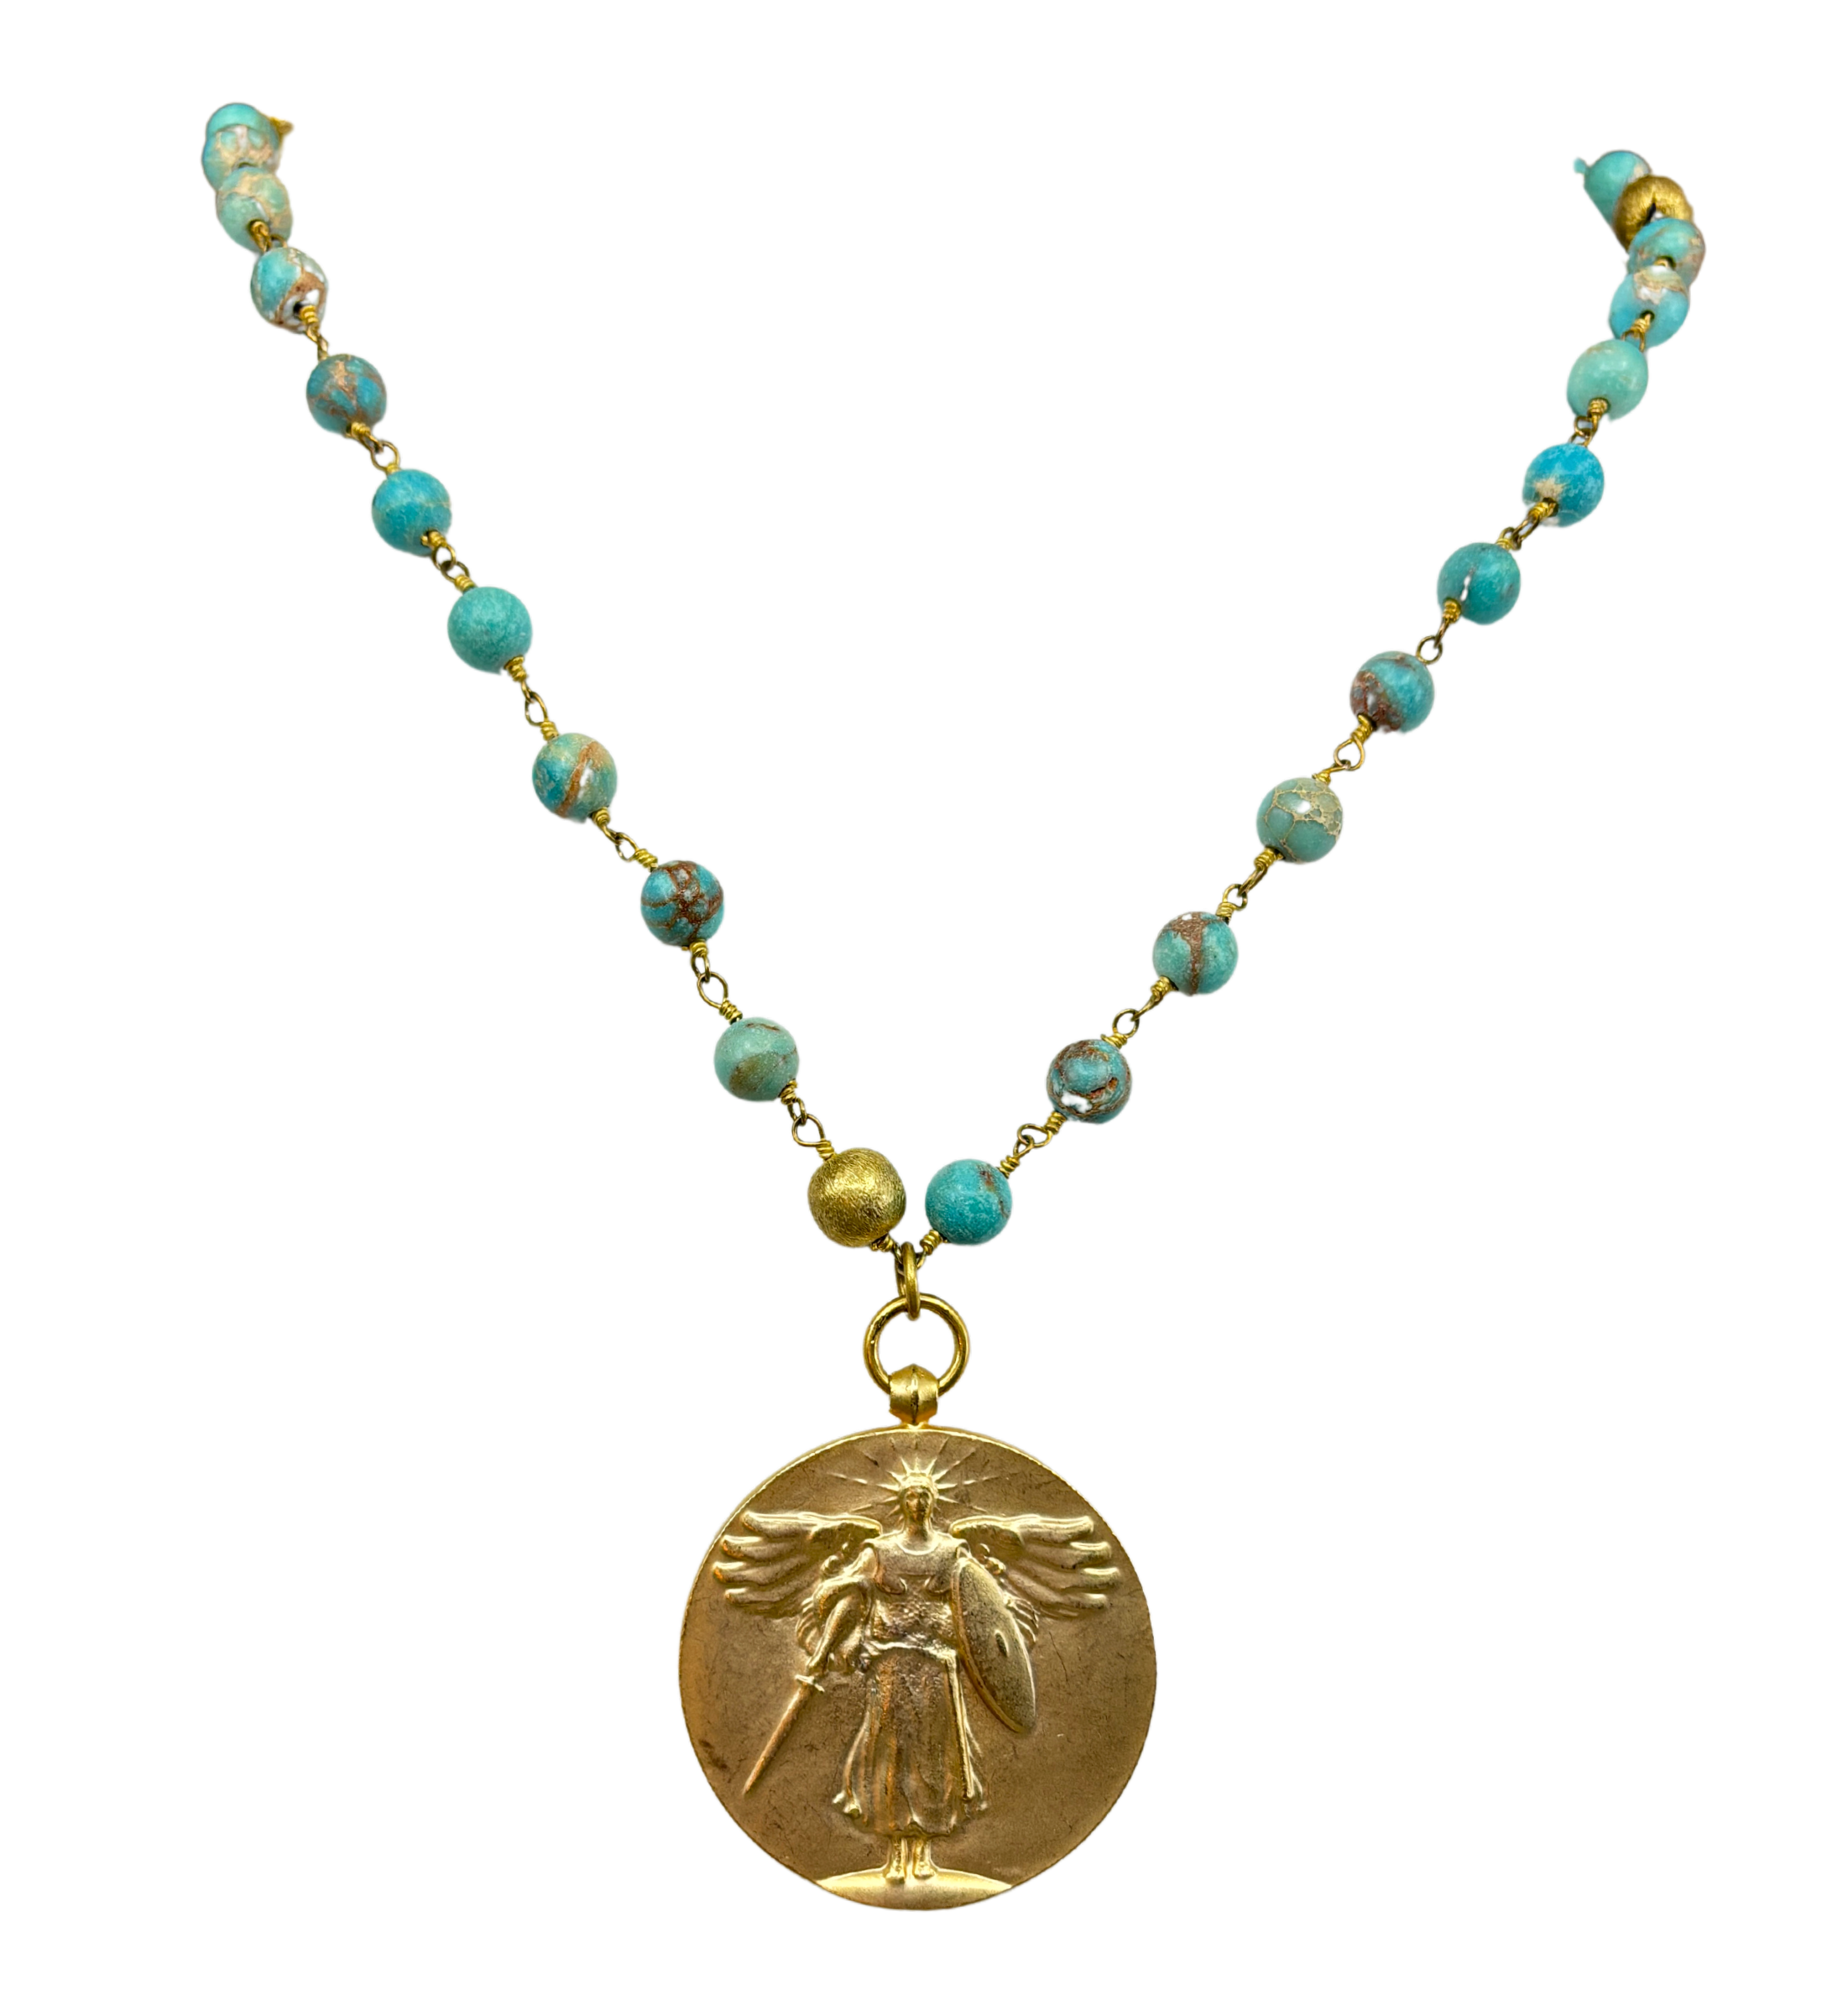 Reproduction Gold Plated Victory Medal Necklace